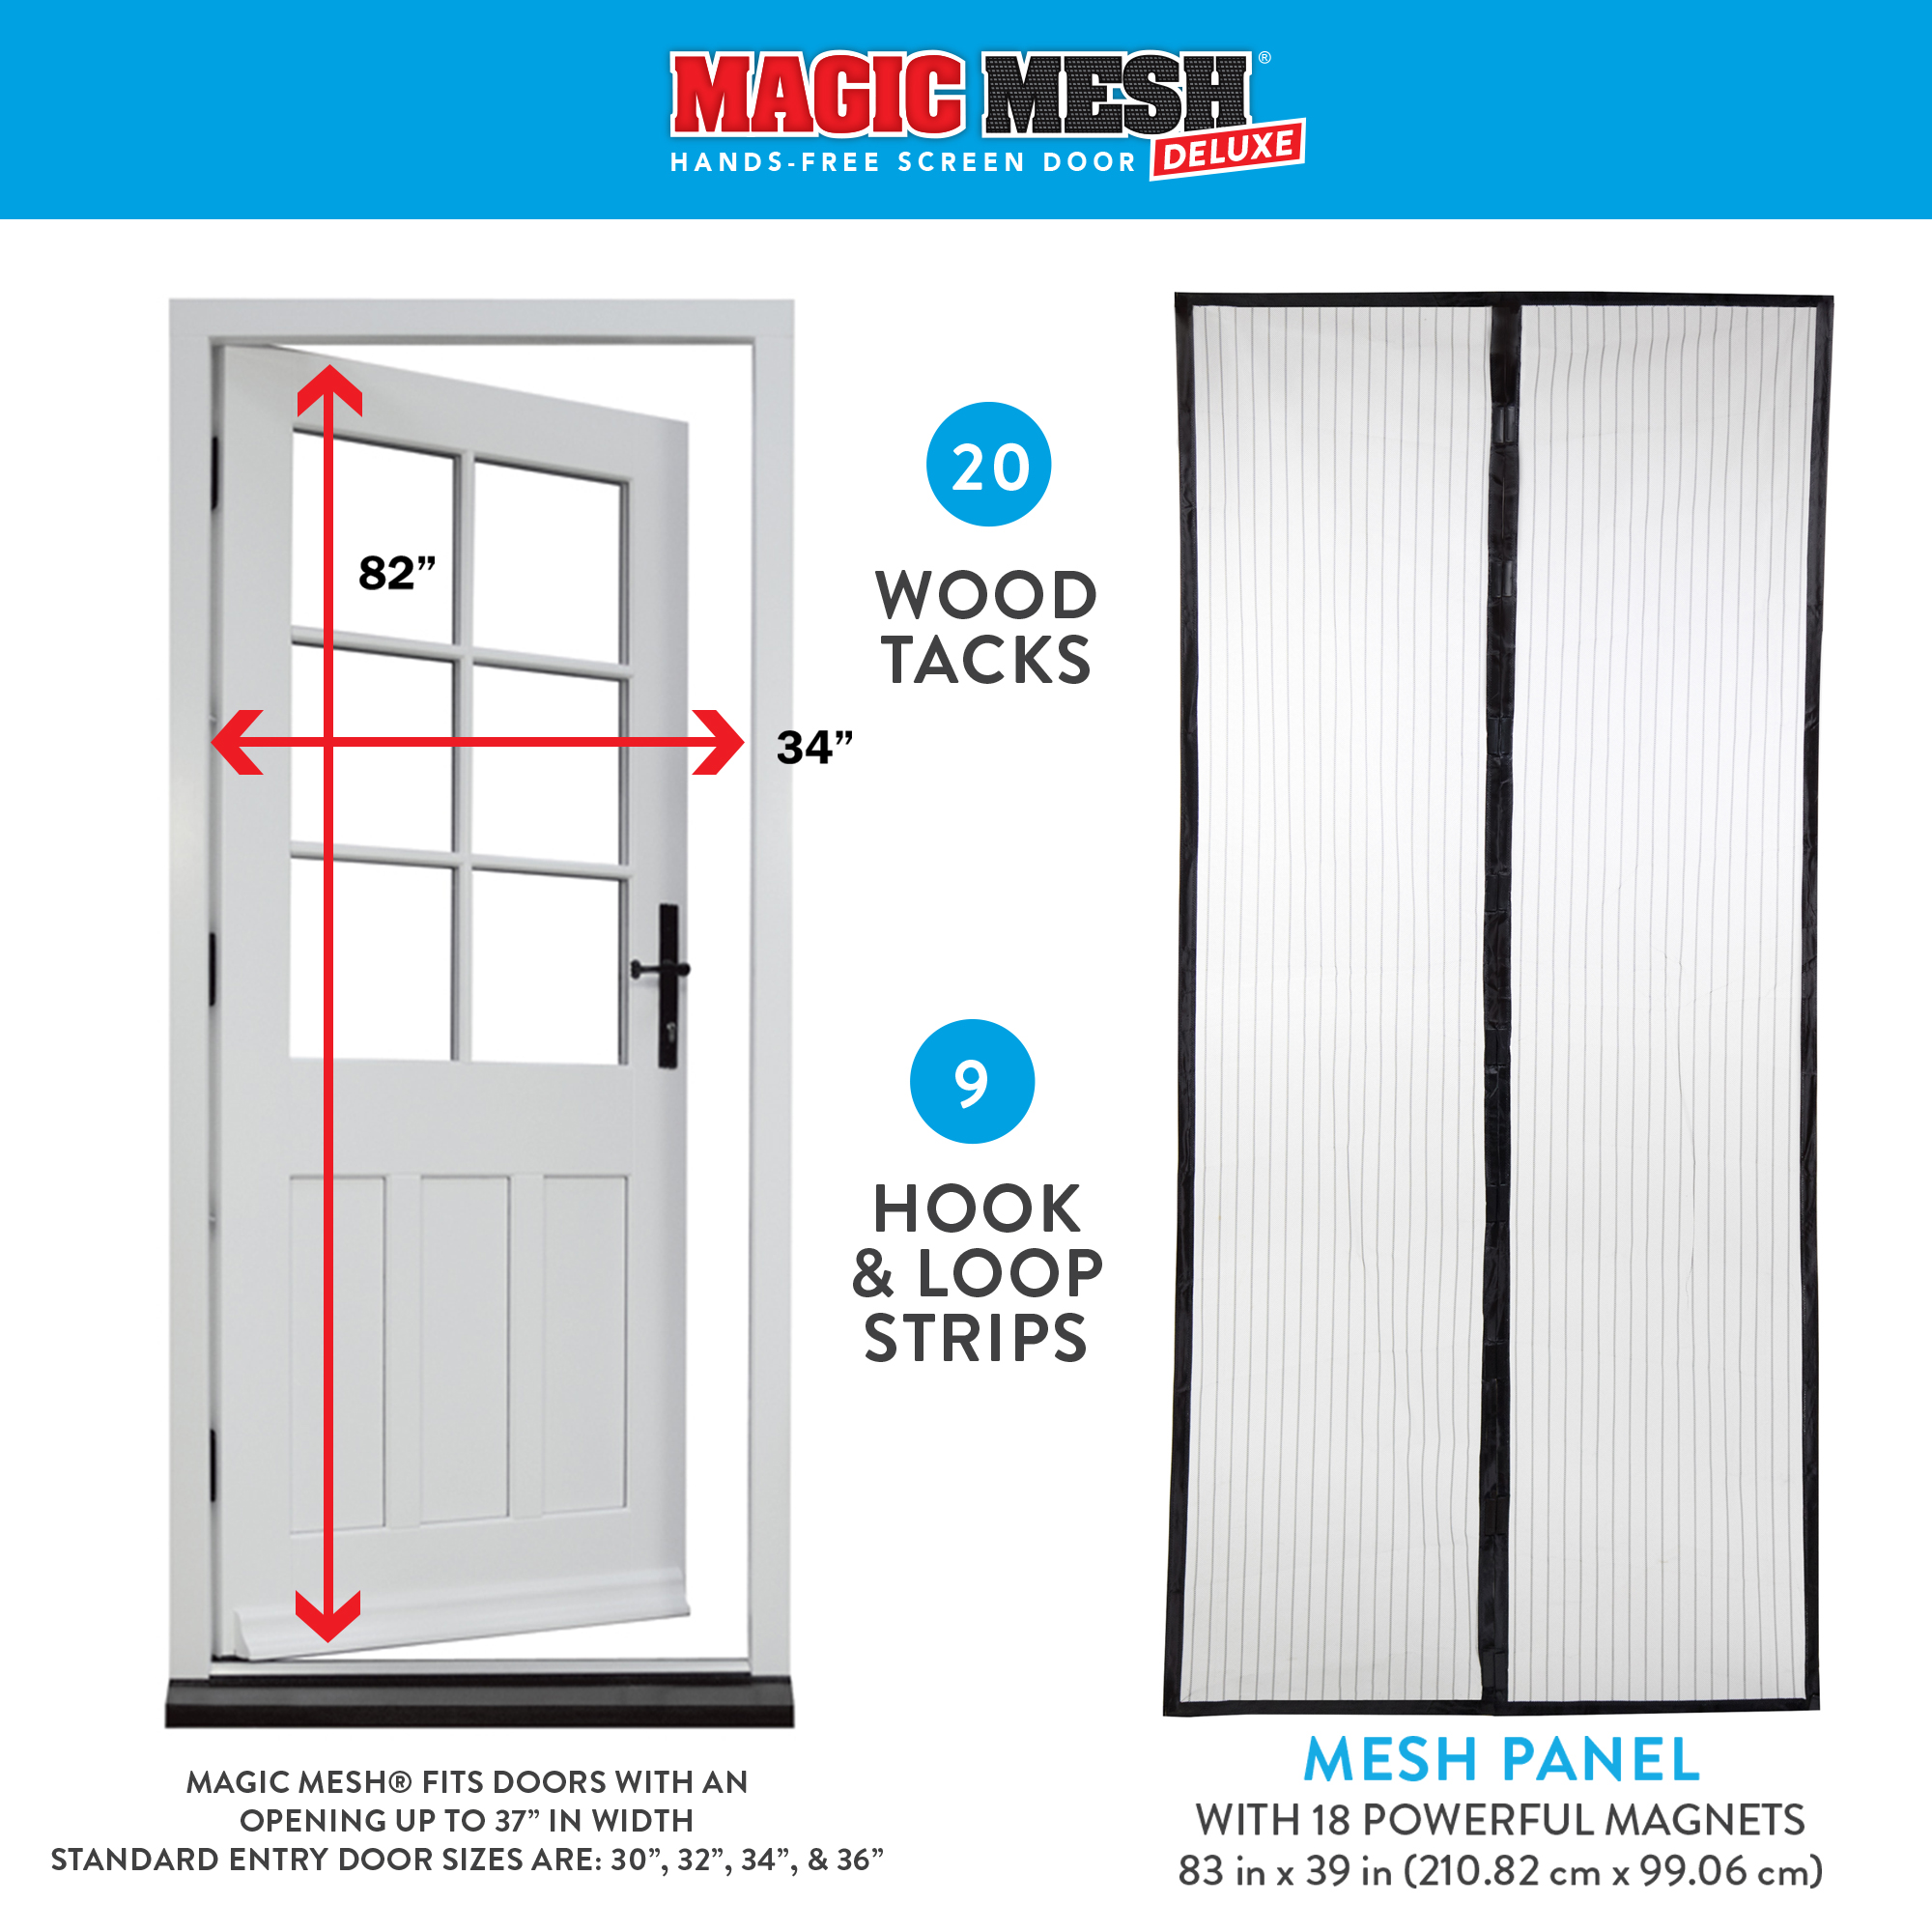 Magic Mesh Deluxe Hands Free Screen Door Cover, As Seen on TV Trusted Tradition Since